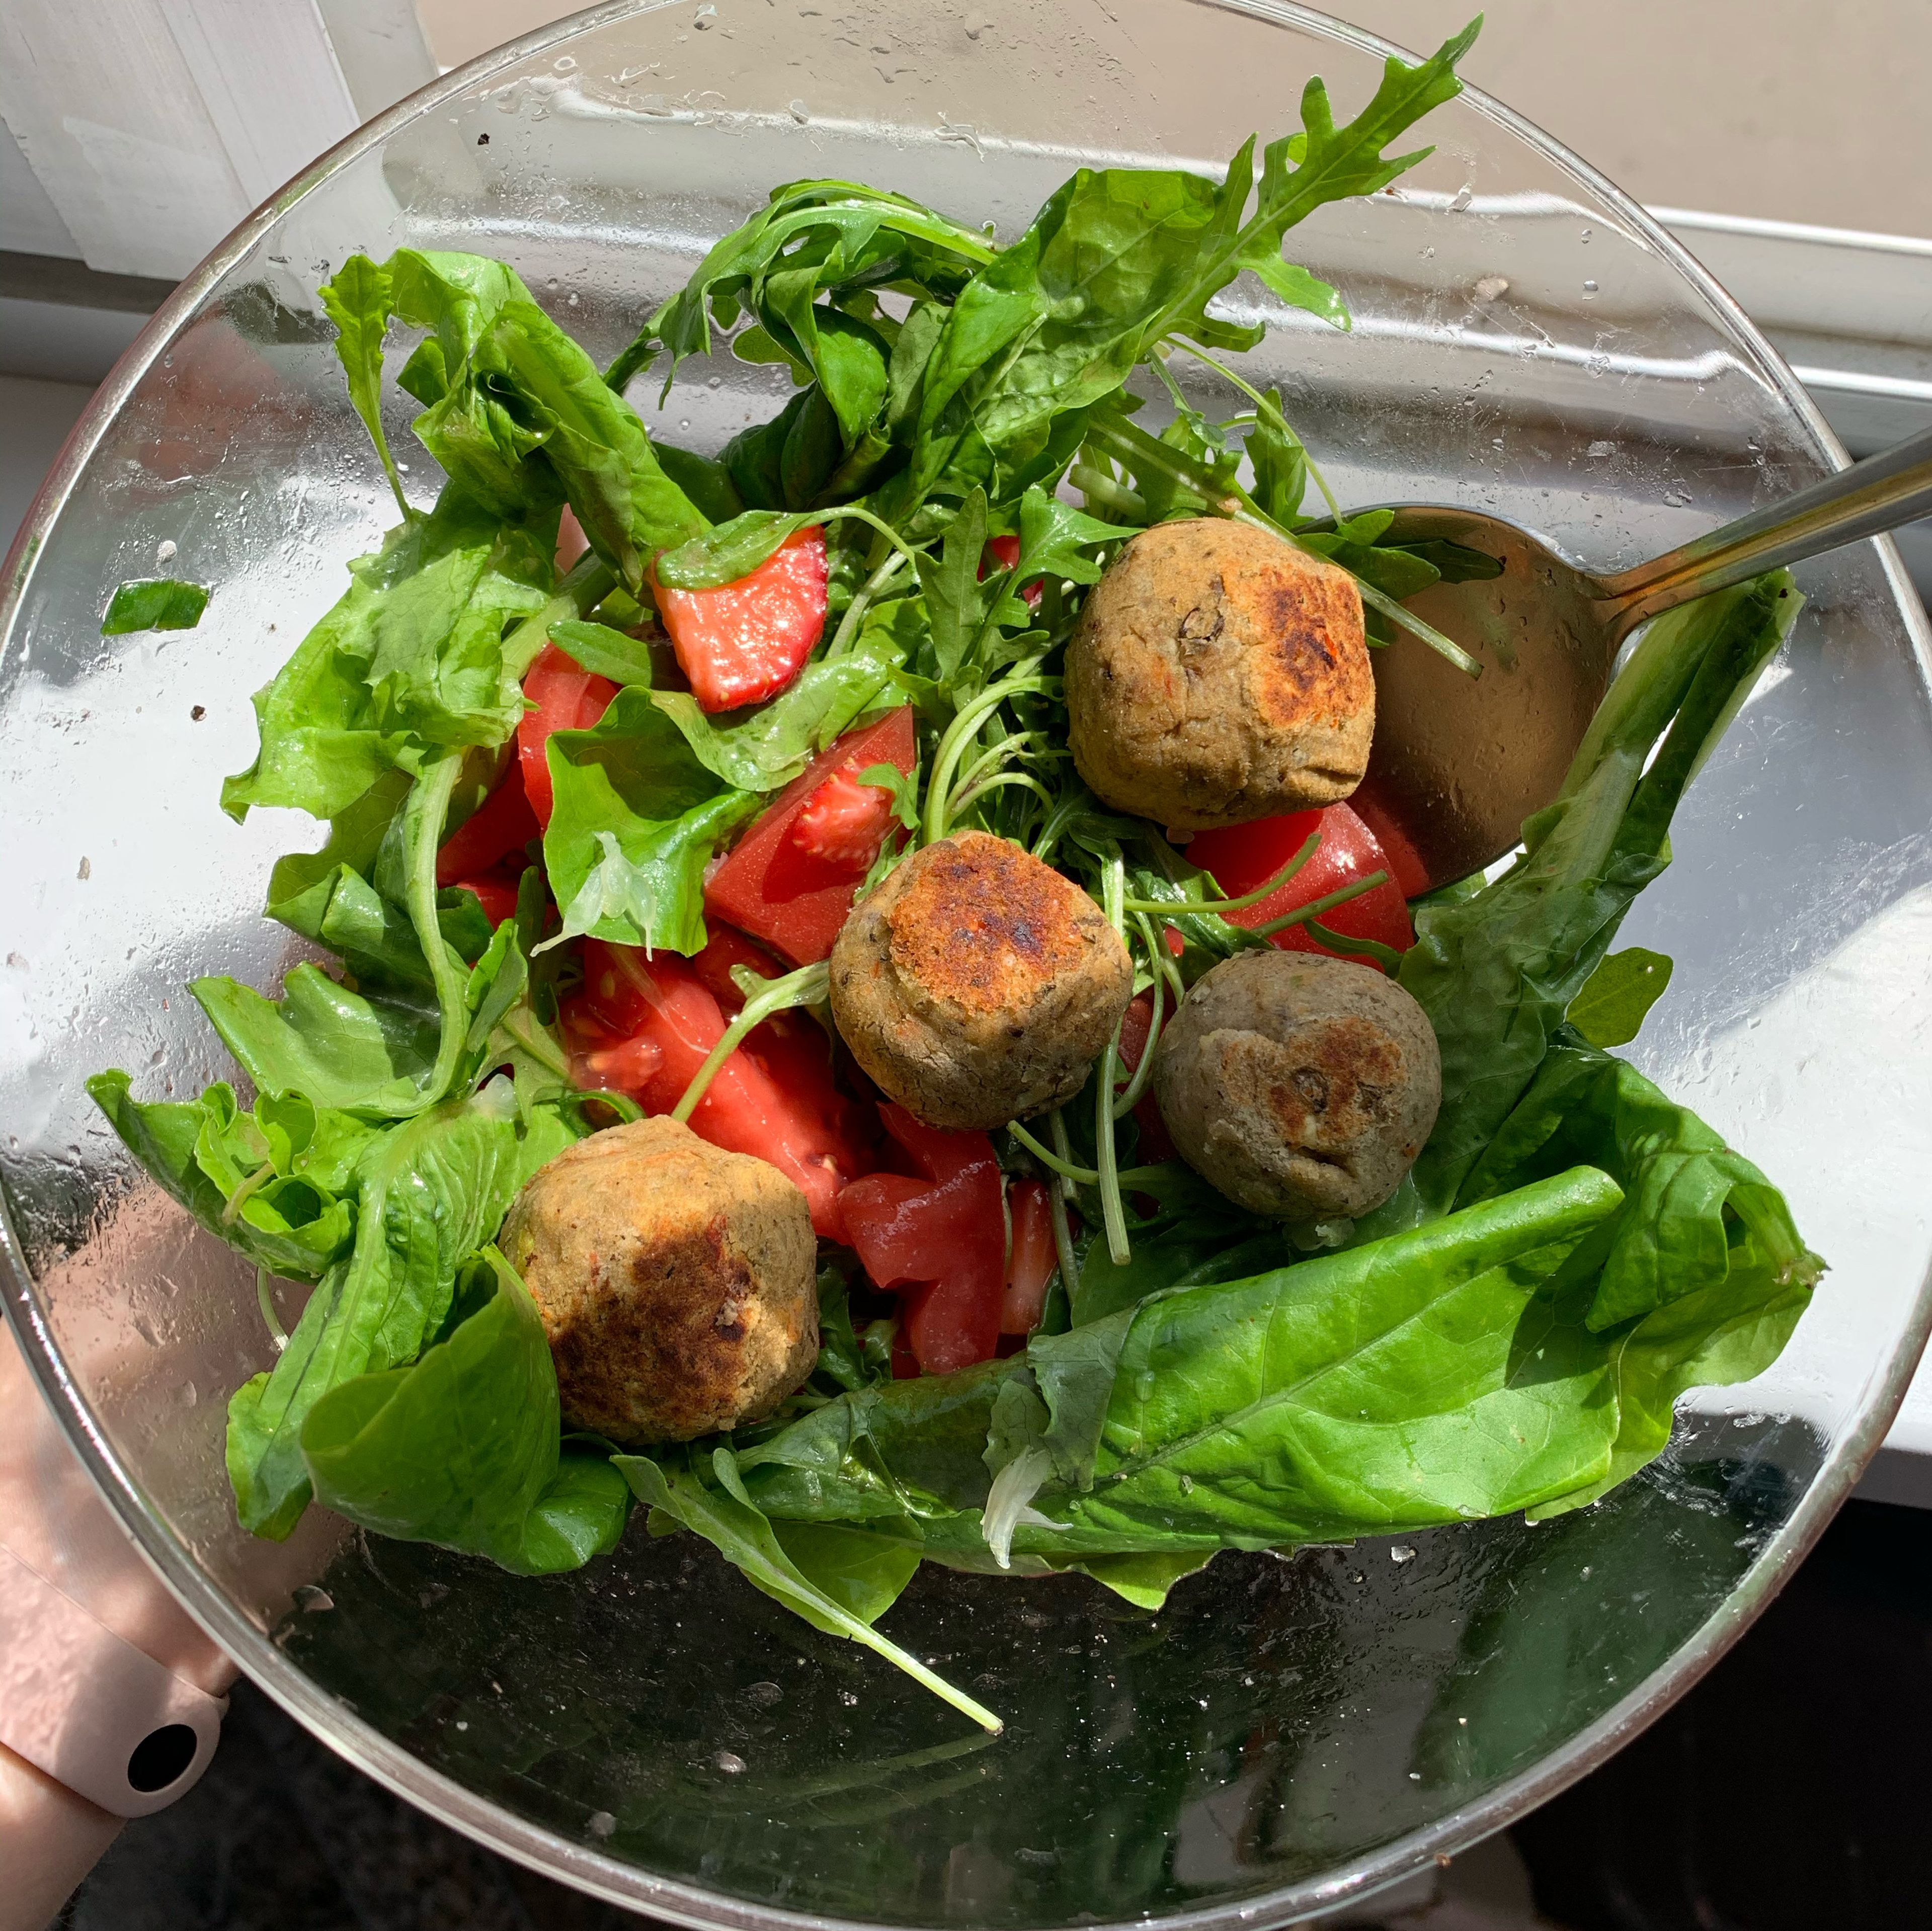 Make your fave salad and add some balls in it. I also put some raspberries, they add pleasant sweetness to the salad. 